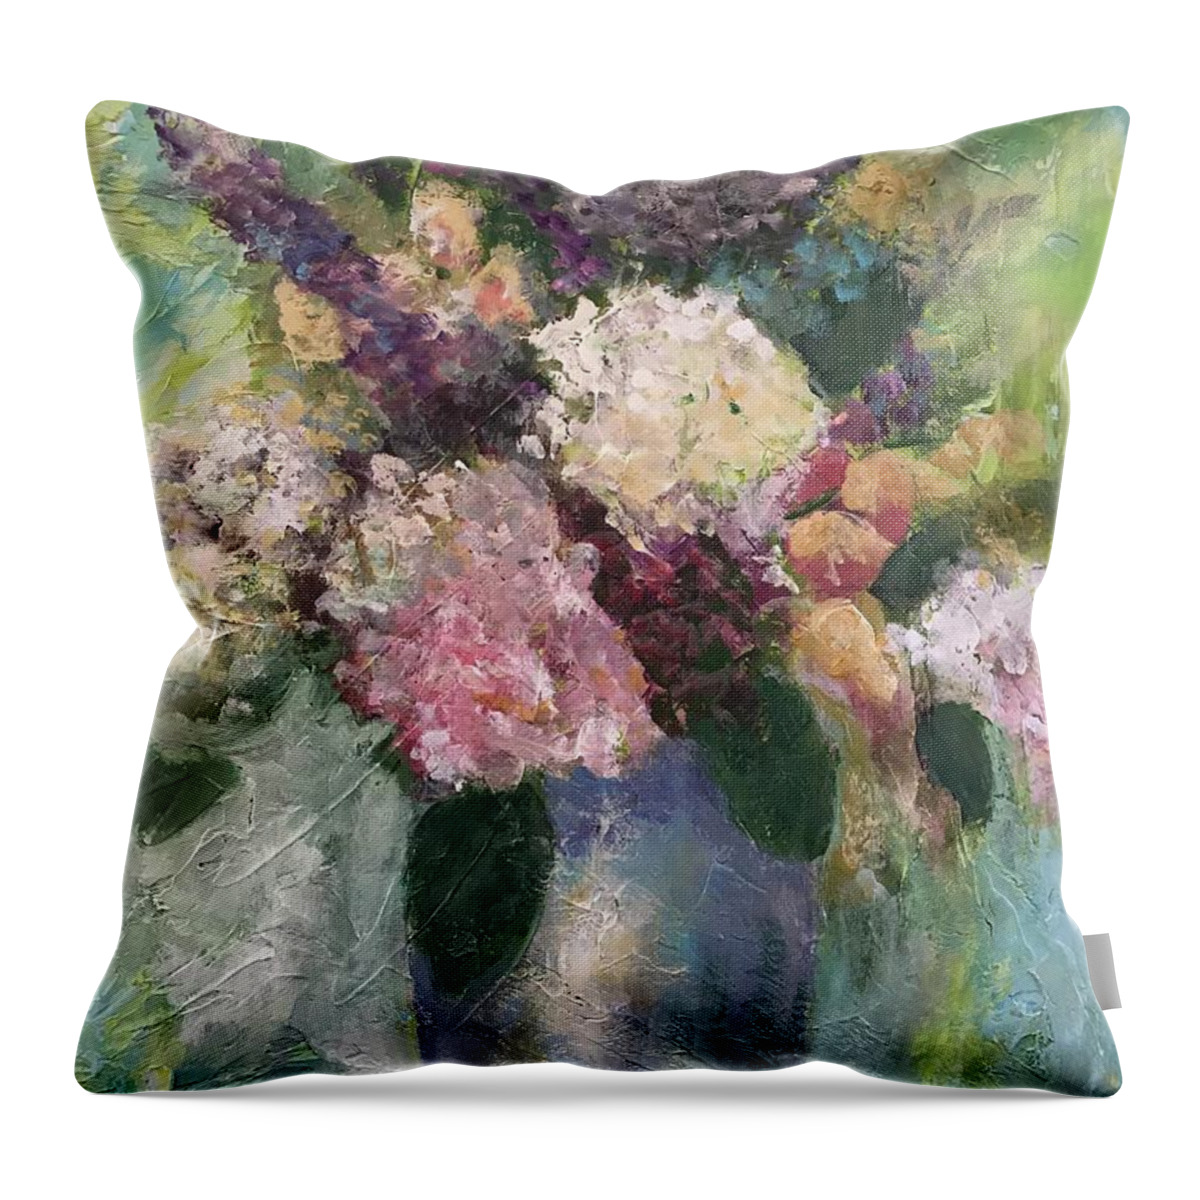 Hydrangeas Throw Pillow featuring the painting Birthday Surprise by Gloria Smith